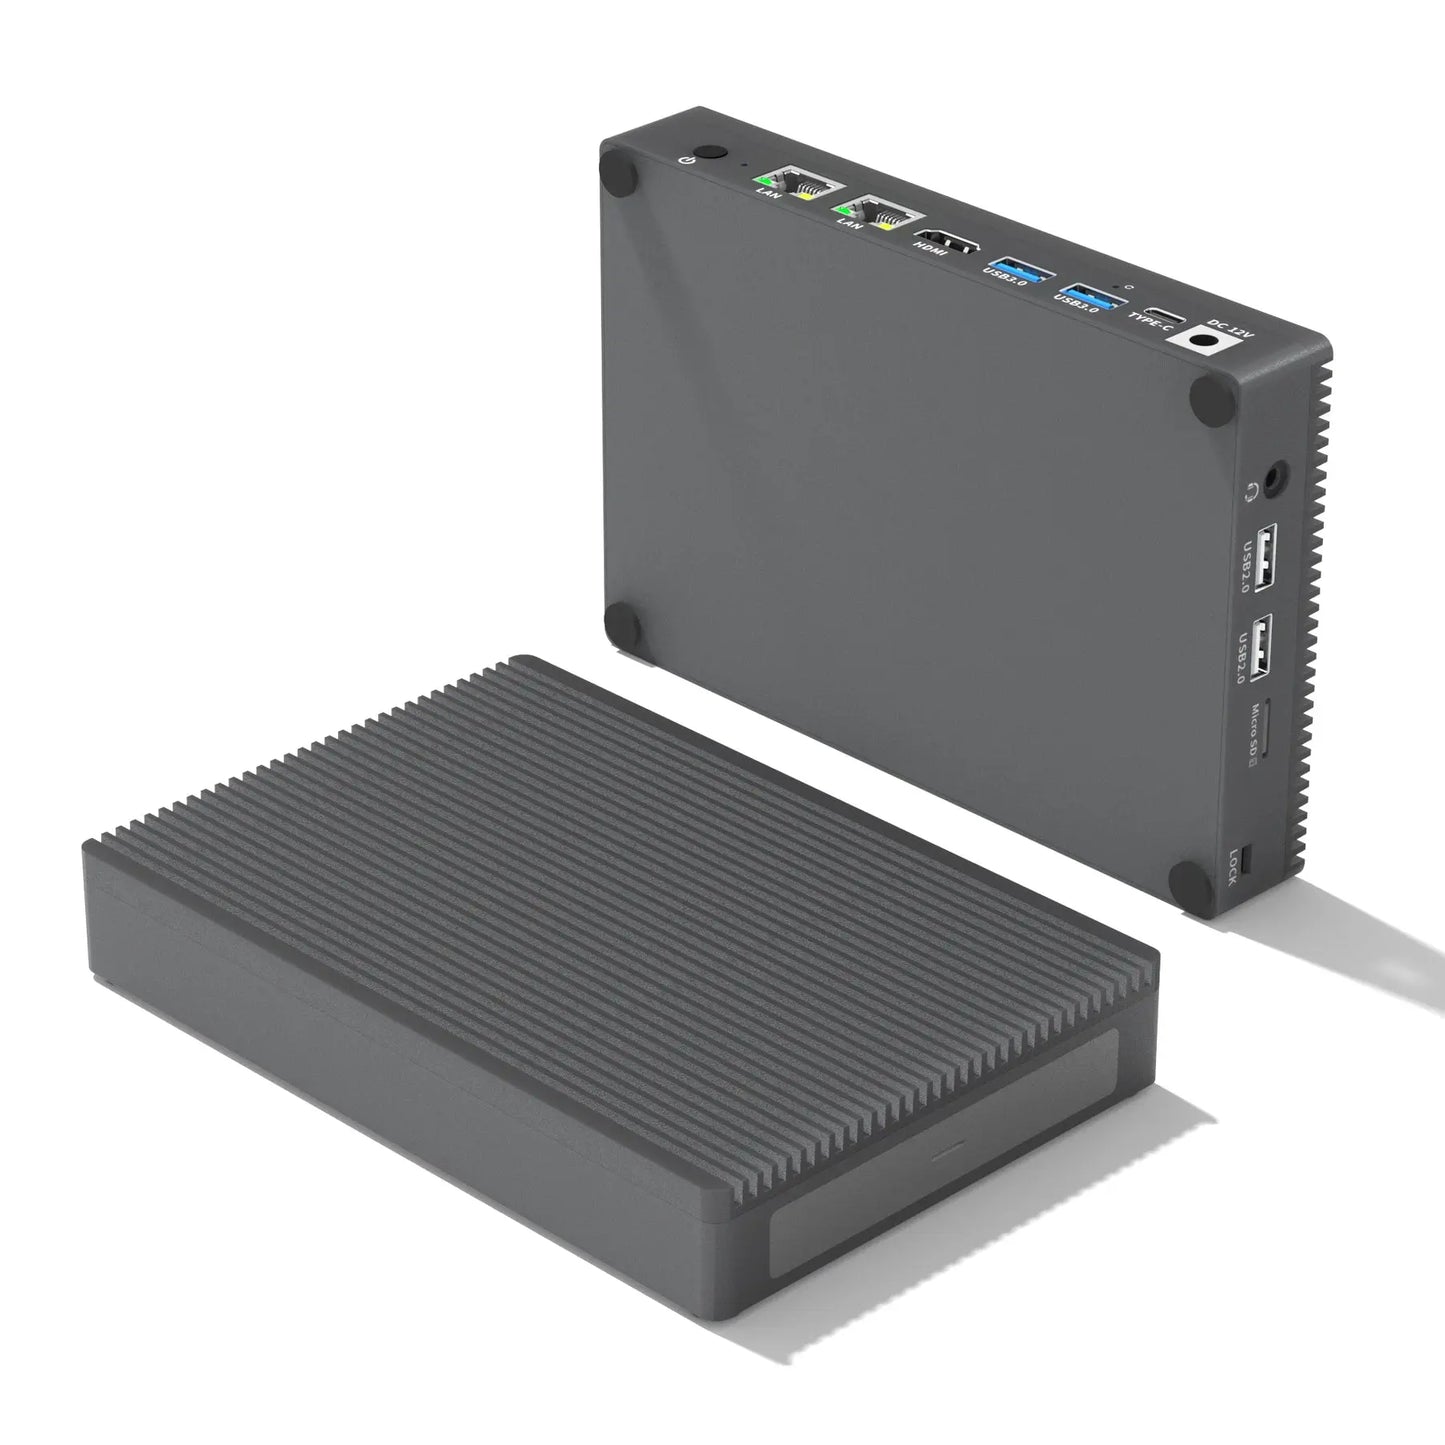 This is a mini PC that is easier to carry around and work flexibly. The compact size makes the mini PC a great choice for your light office work, 4K video playback, and more.